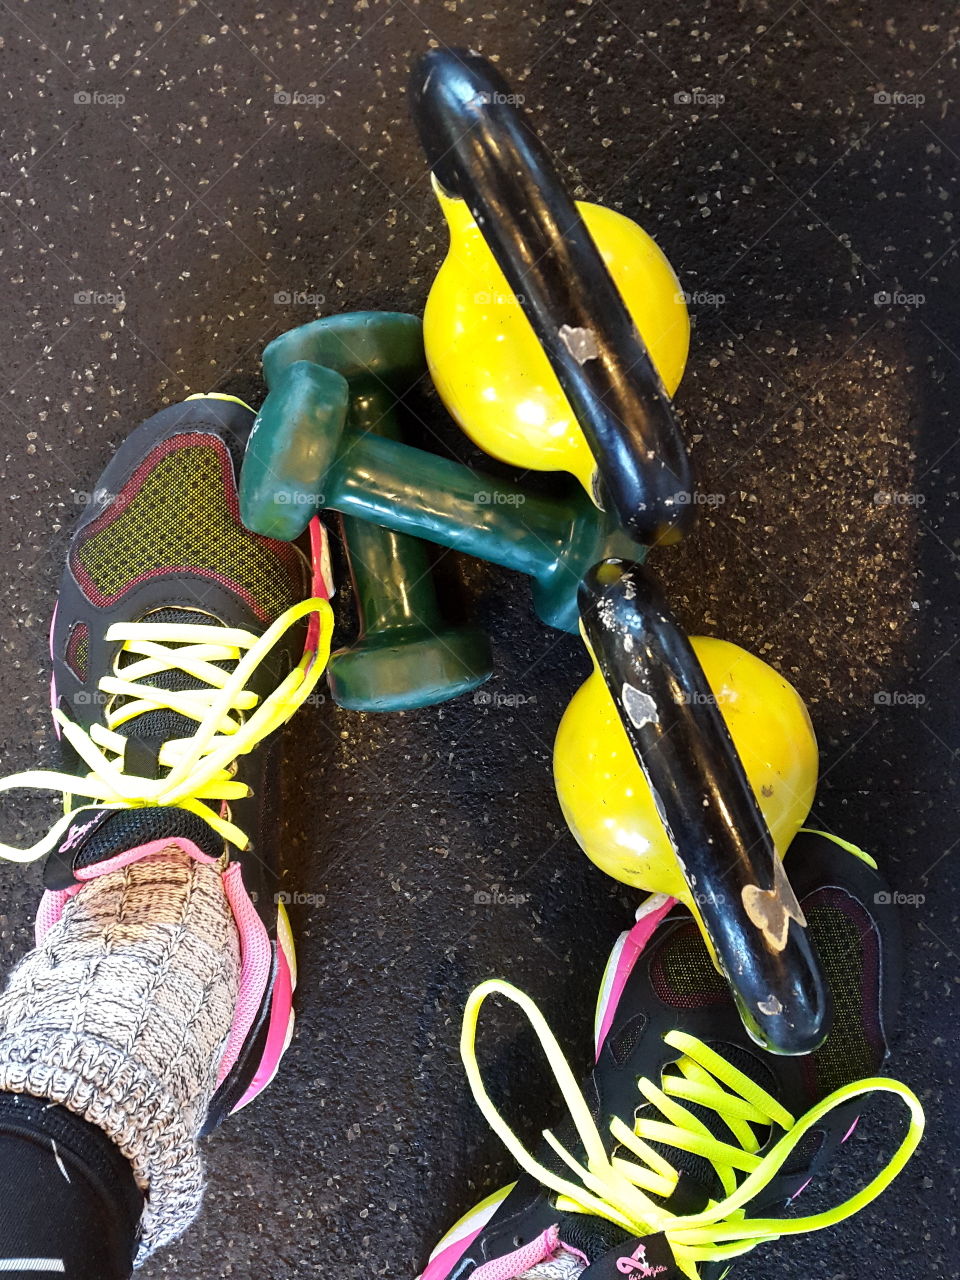 feeling good with happy laces and bounce on my stride. Let's do this